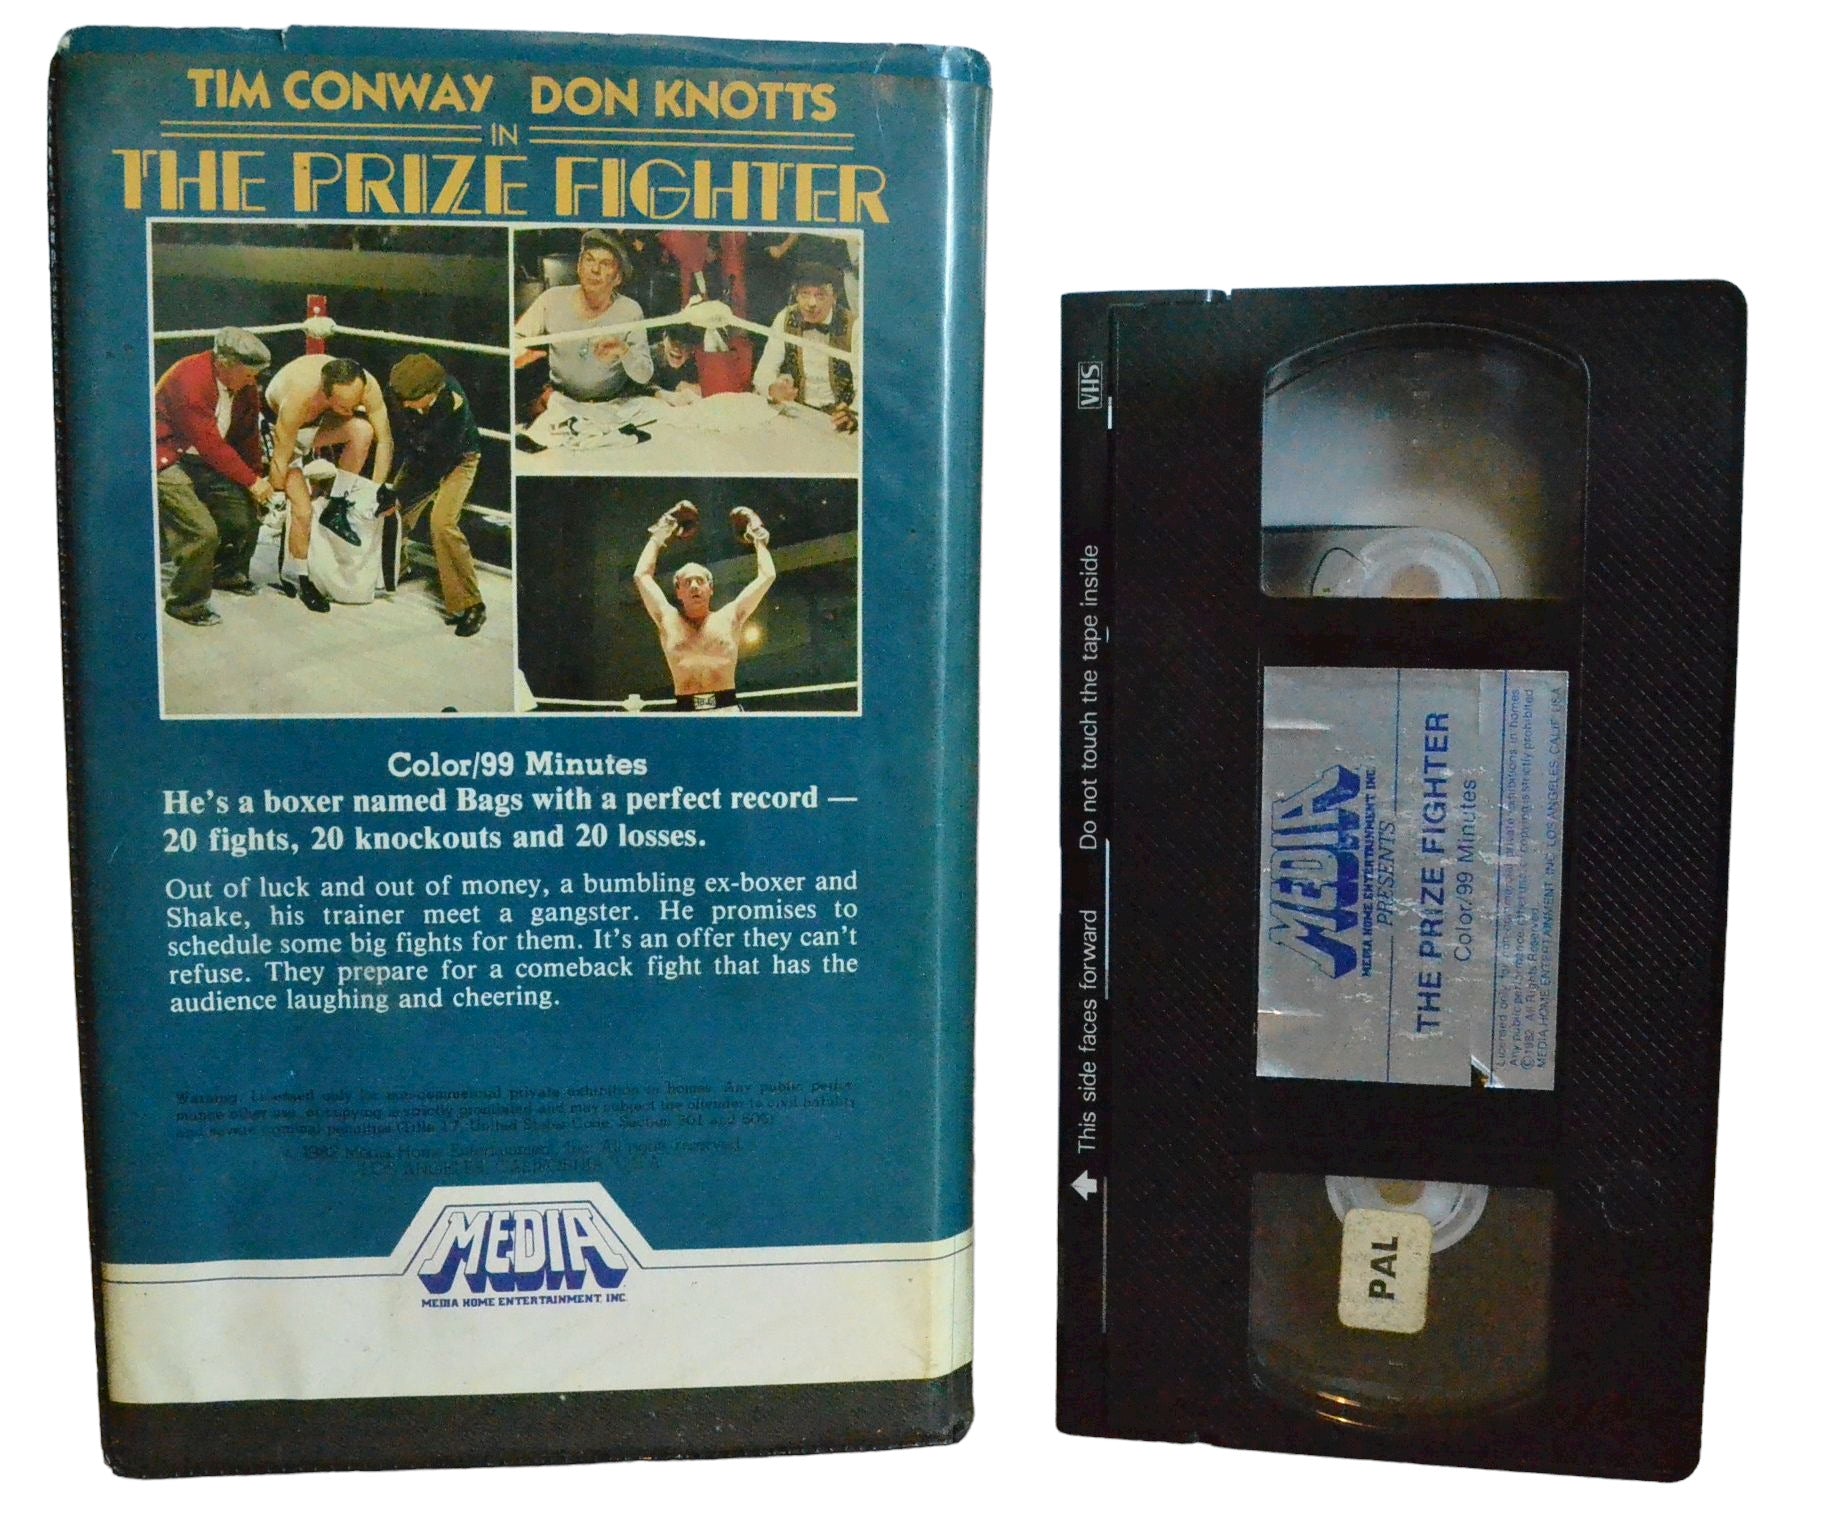 Tim Conway Don Knotts In The Prize Fighter - Tim Conway - Media HOme Entertainment INC - Large Box - PAL - VHS-